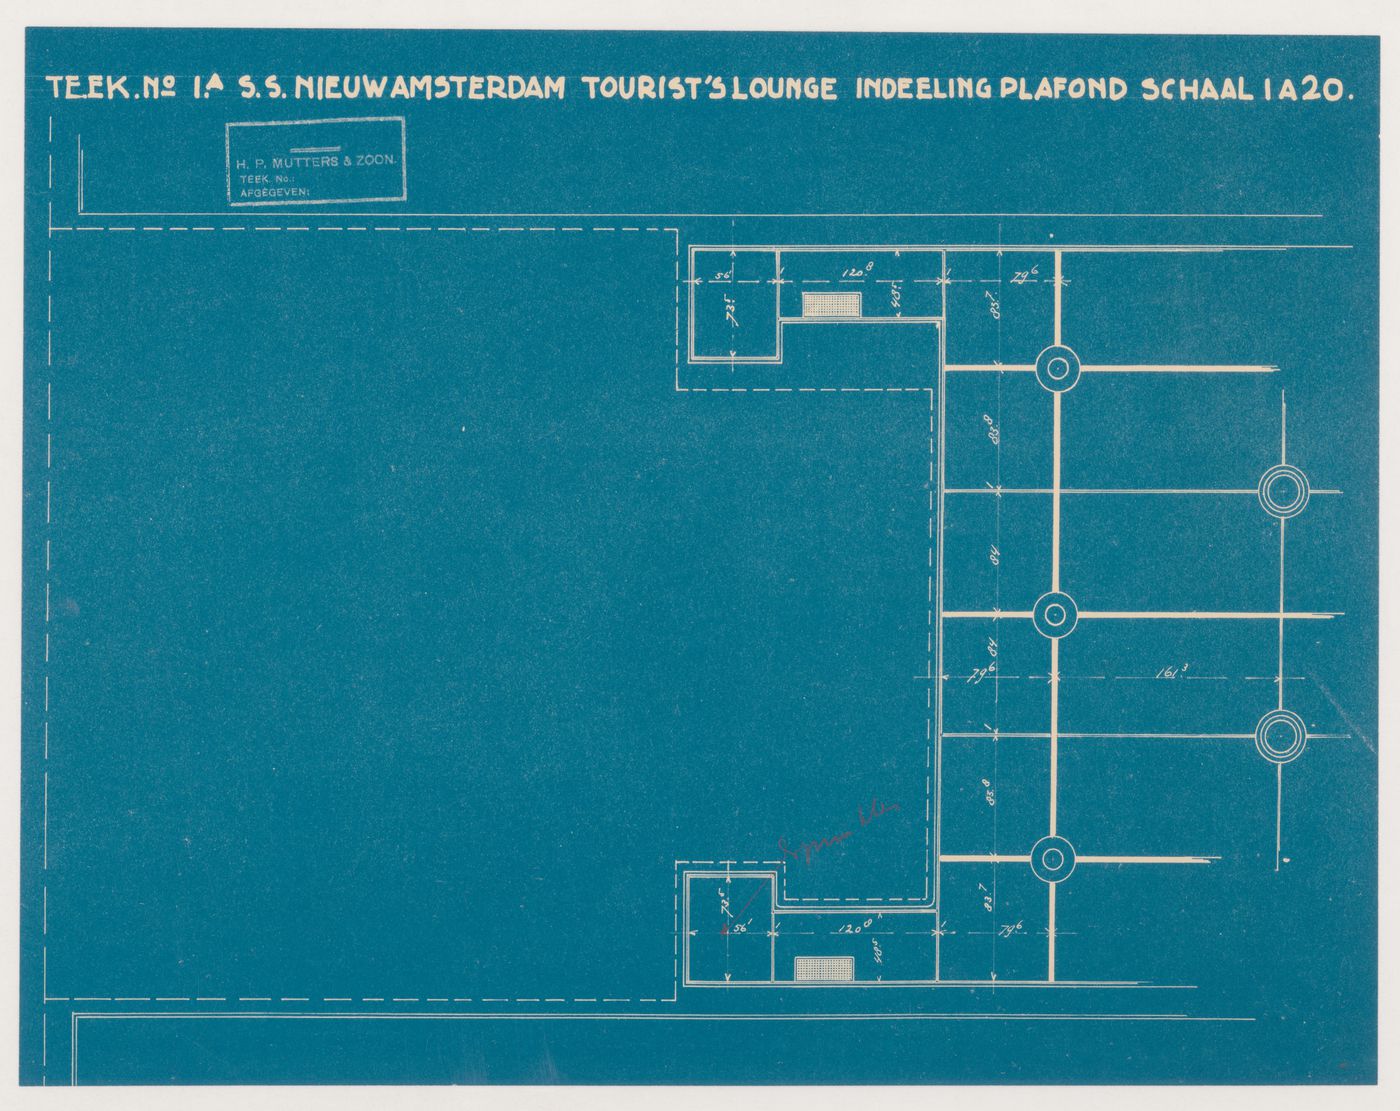 Reflected ceiling plan for the tourists' lounge for the S.s. Nieuw Amsterdam